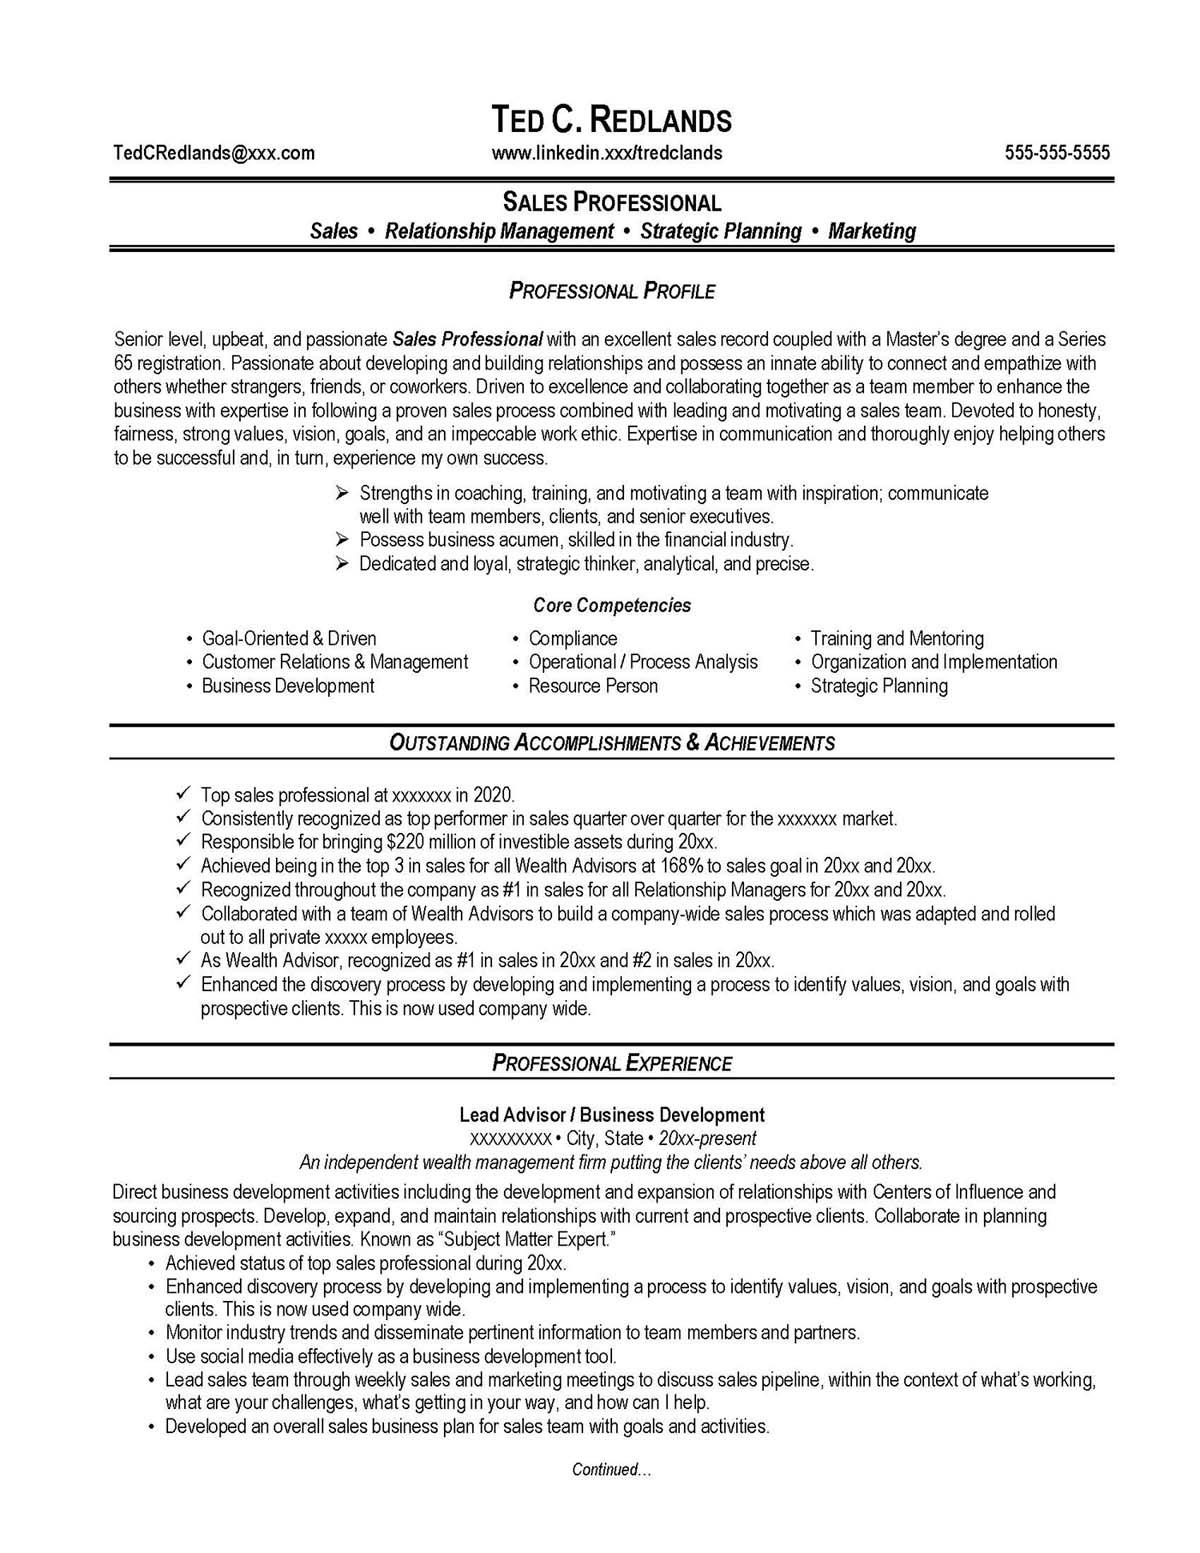 Sample resume: Wealth Management, Mid Experience, Combination